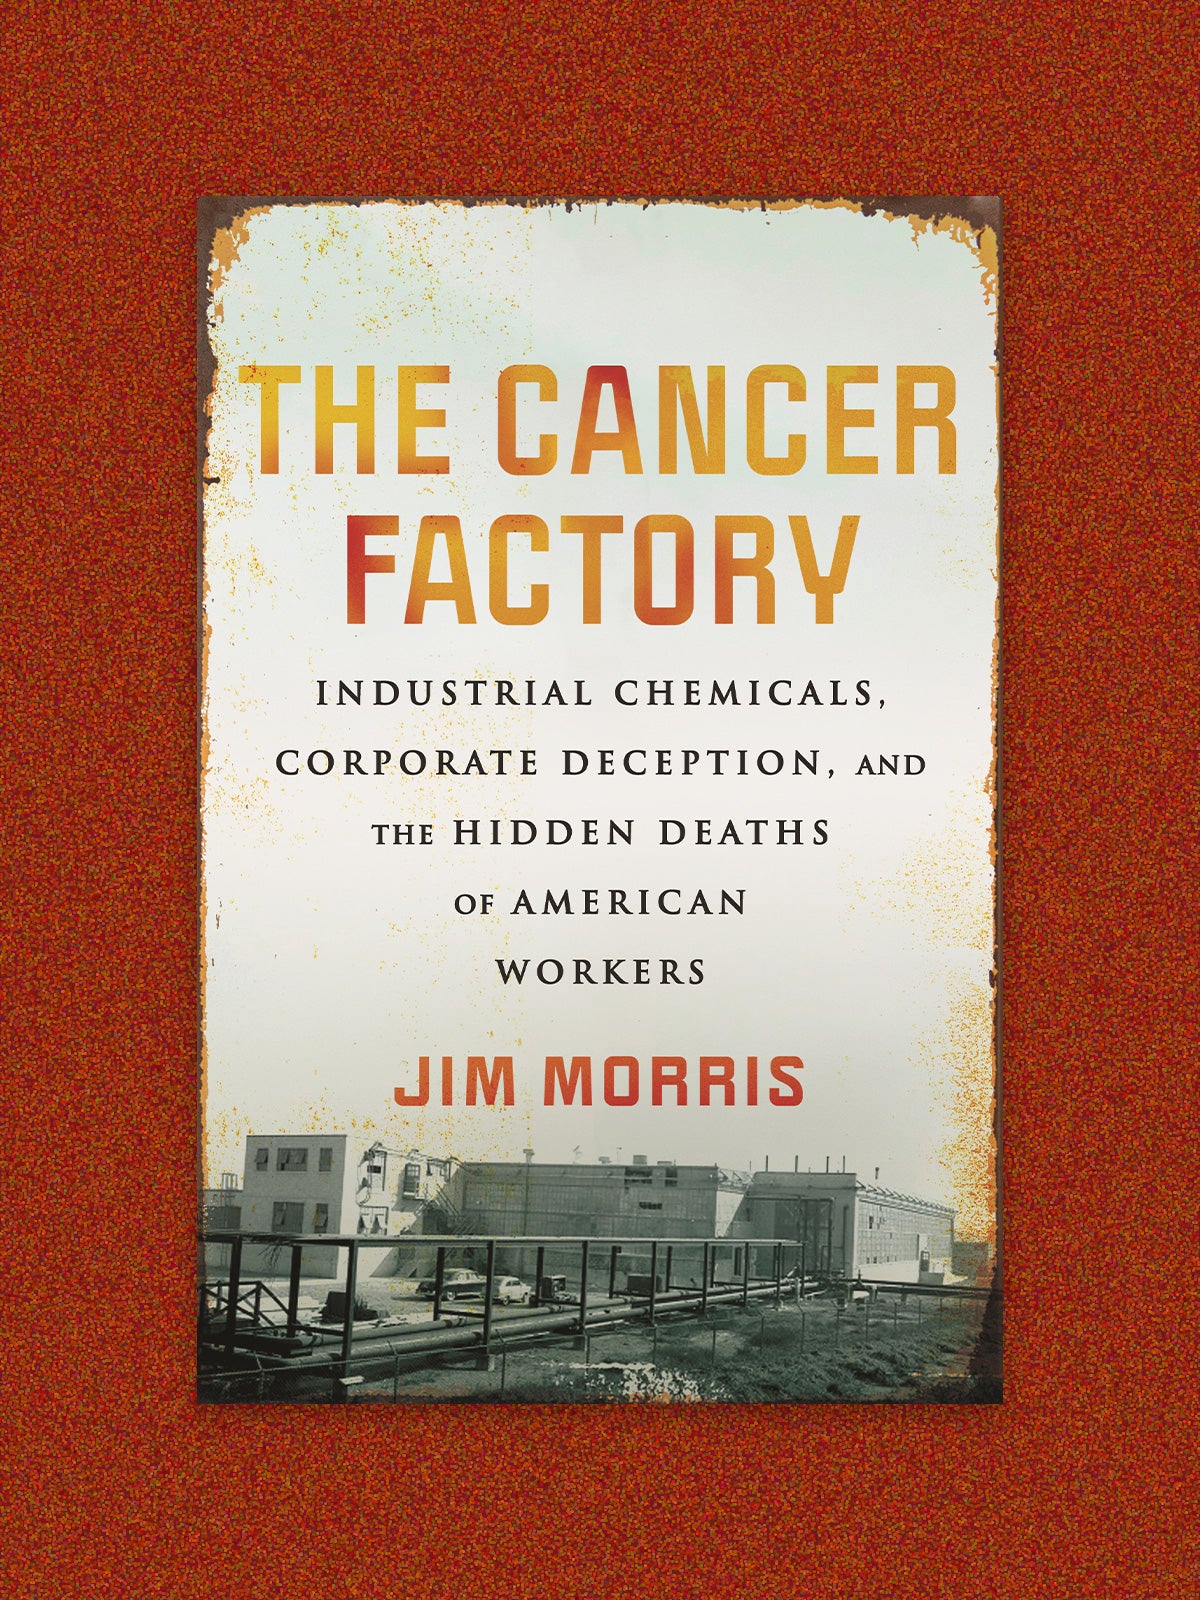 Book cover: “The Cancer Factory: Industrial chemicals, corporate deception and the hidden deaths of American workers” by Jim Morris. The cook over is a historic photo of a factory that is worn and faded. The main text is yellow and orange. Secondary text is black. The cover is on a dark orange speckled background.